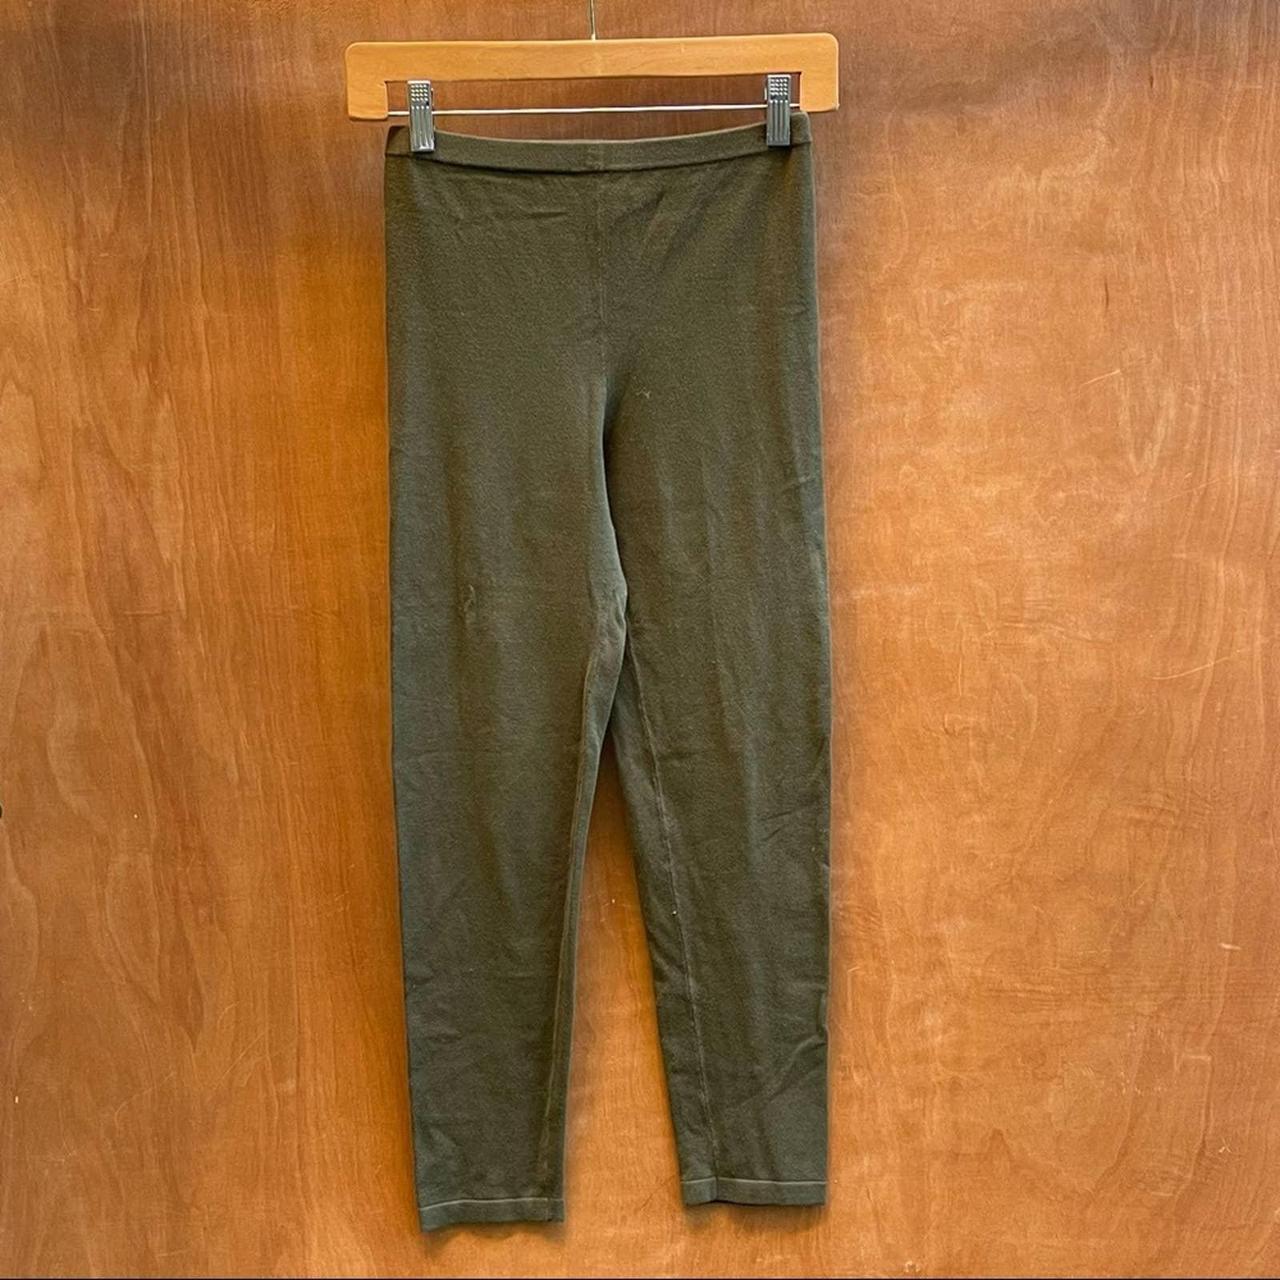 Y3 Women's Green and Black Trousers (2)